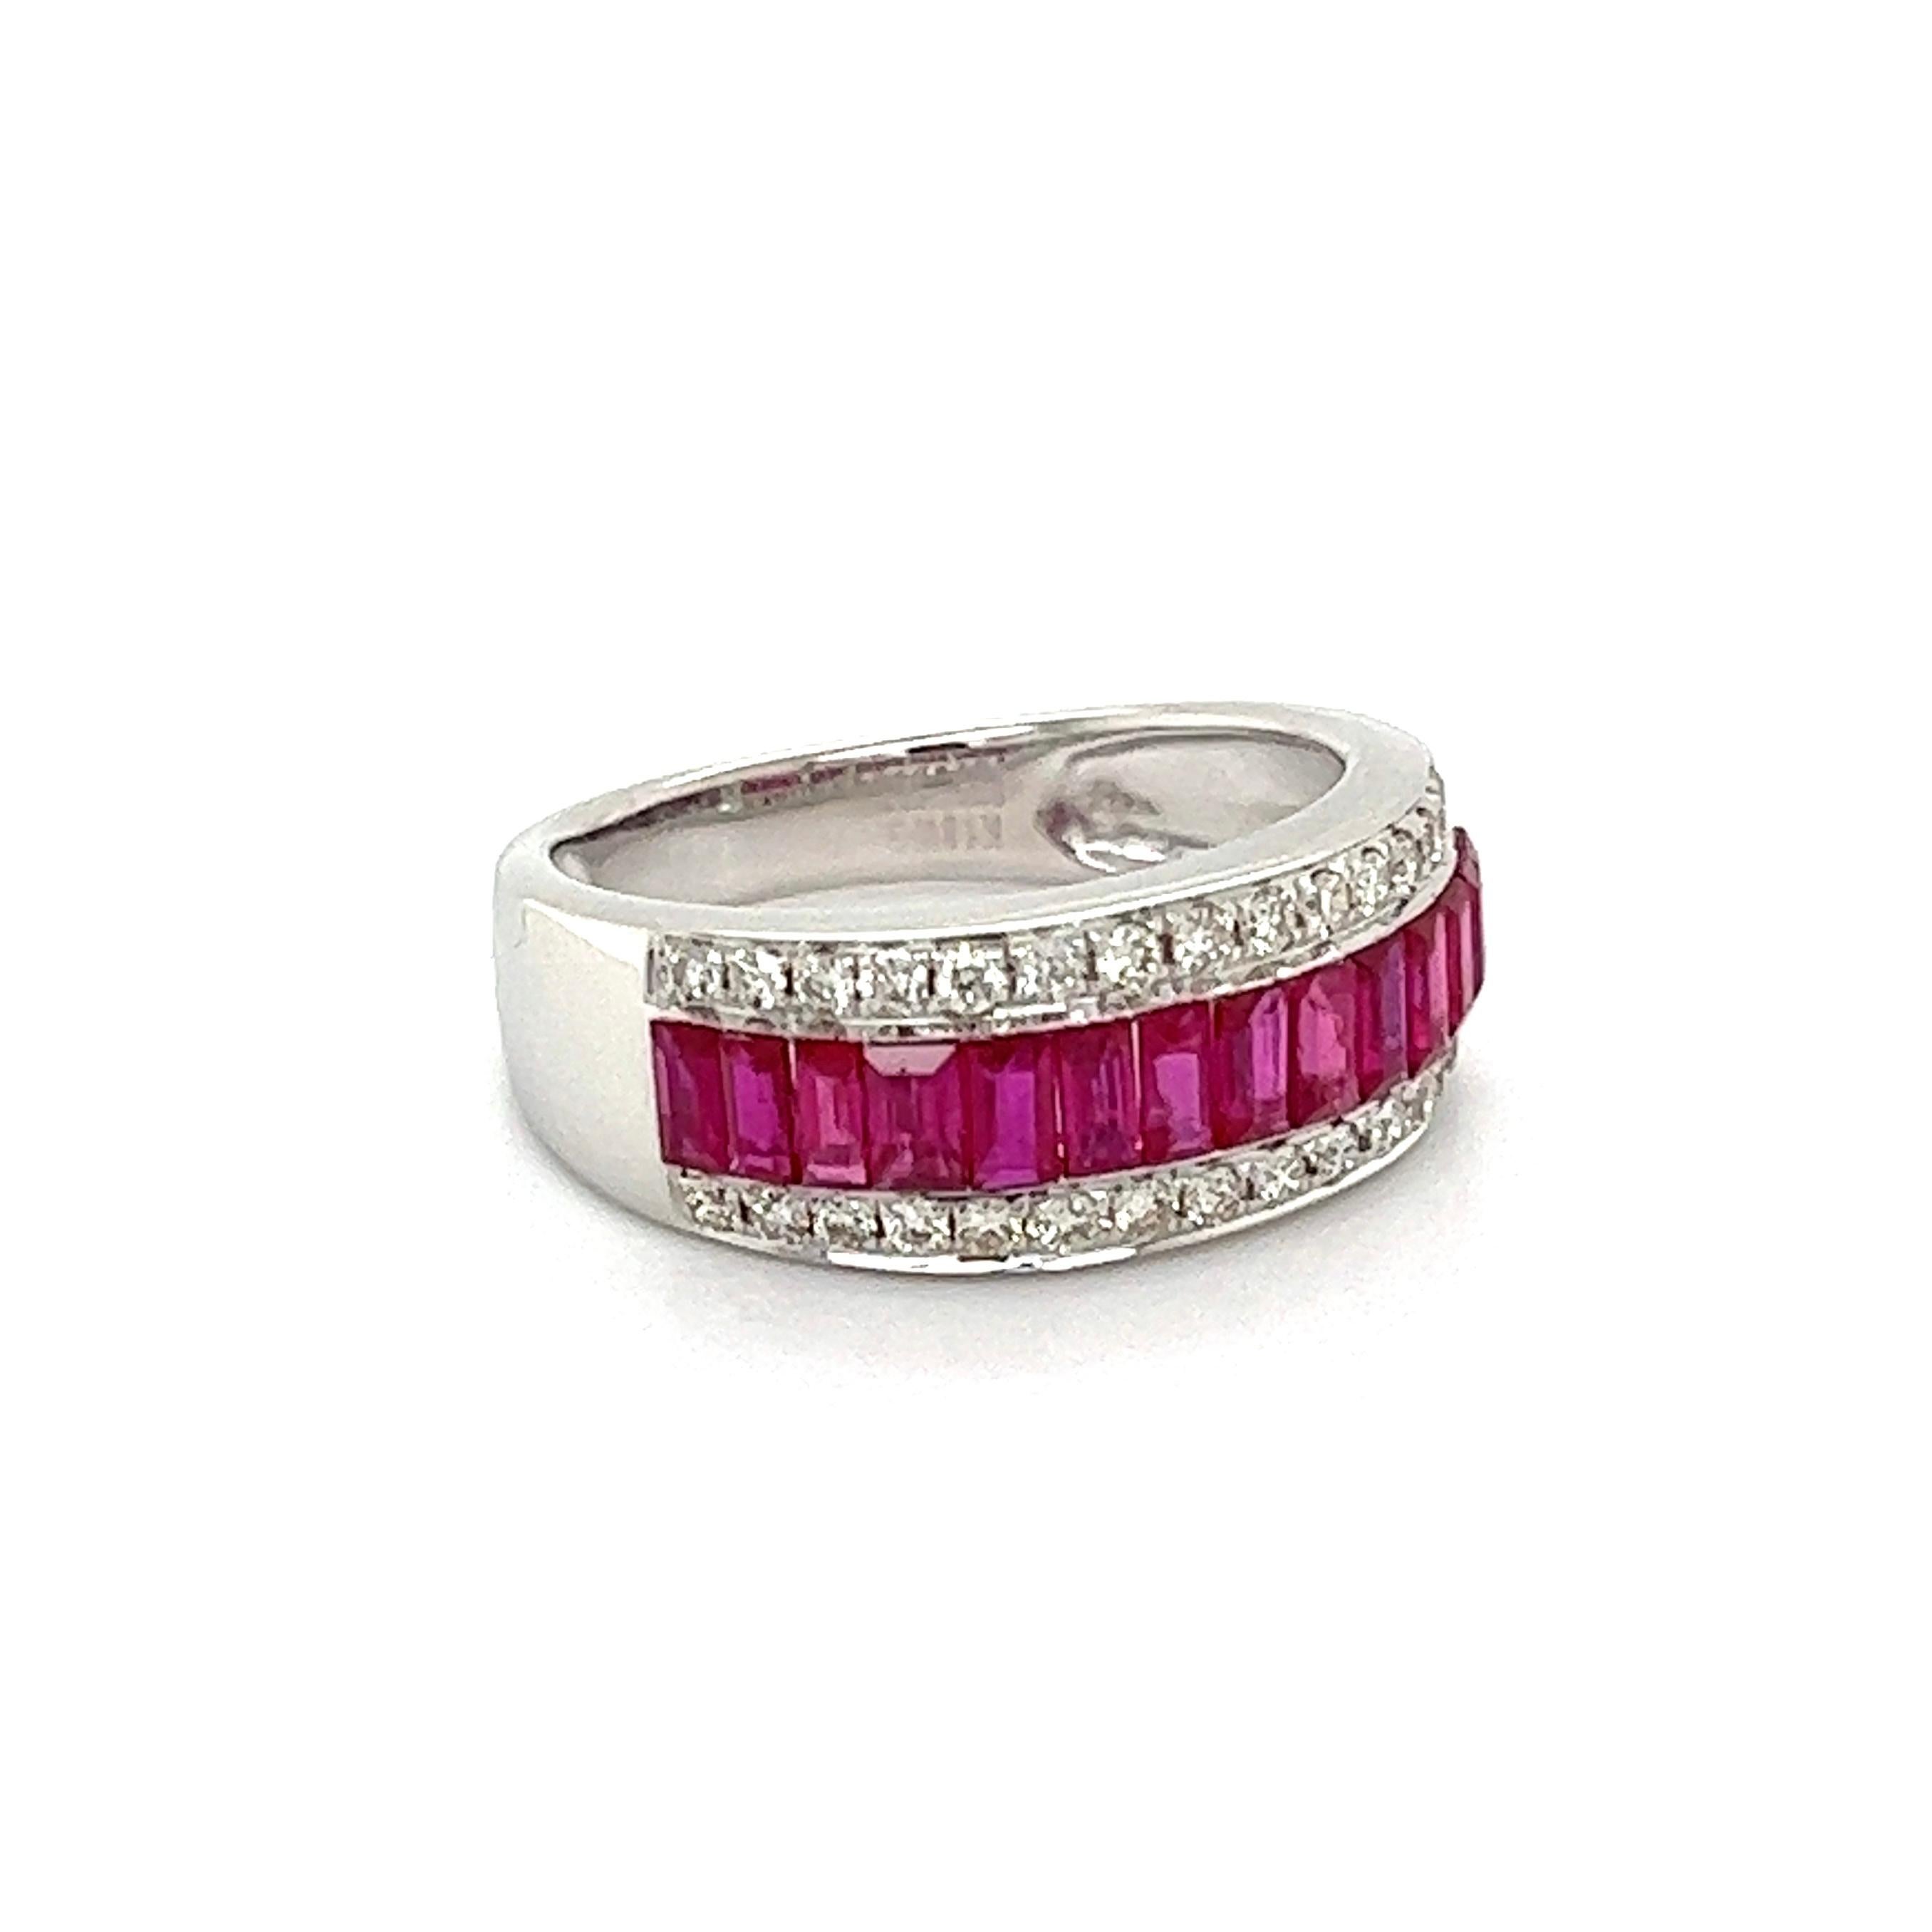 Simply Beautiful! Platinum Cocktail Band Ring. Securely Hand set with high-quality Baguette Rubies, weighing approx. 1.50tcw and Diamonds weighing approx. 0.35tcw. Hand crafted in 18K White Gold. Measuring approx. 0.75” w x 0.39” h x 0.82” d. Ring